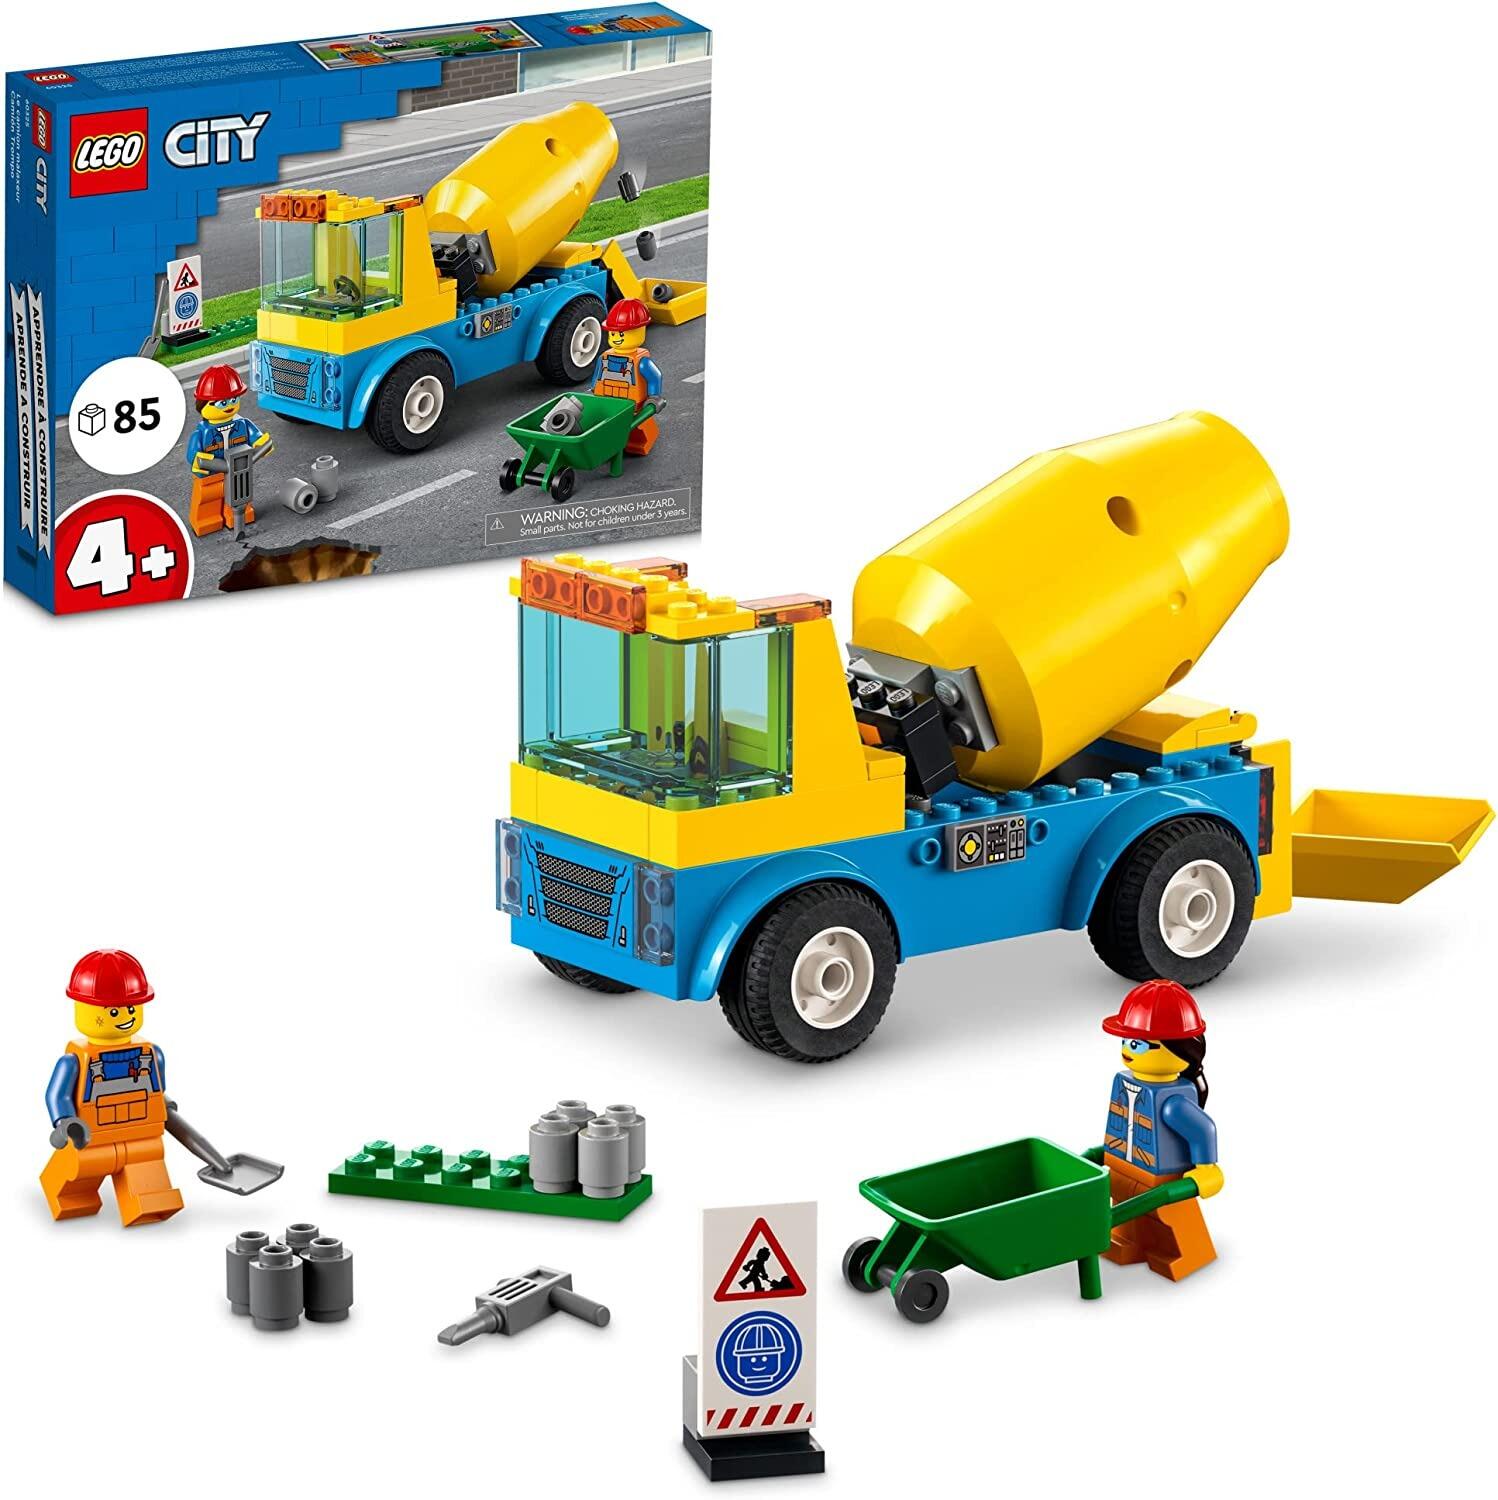 LEGO City 60325 Truck with Cement Mixer